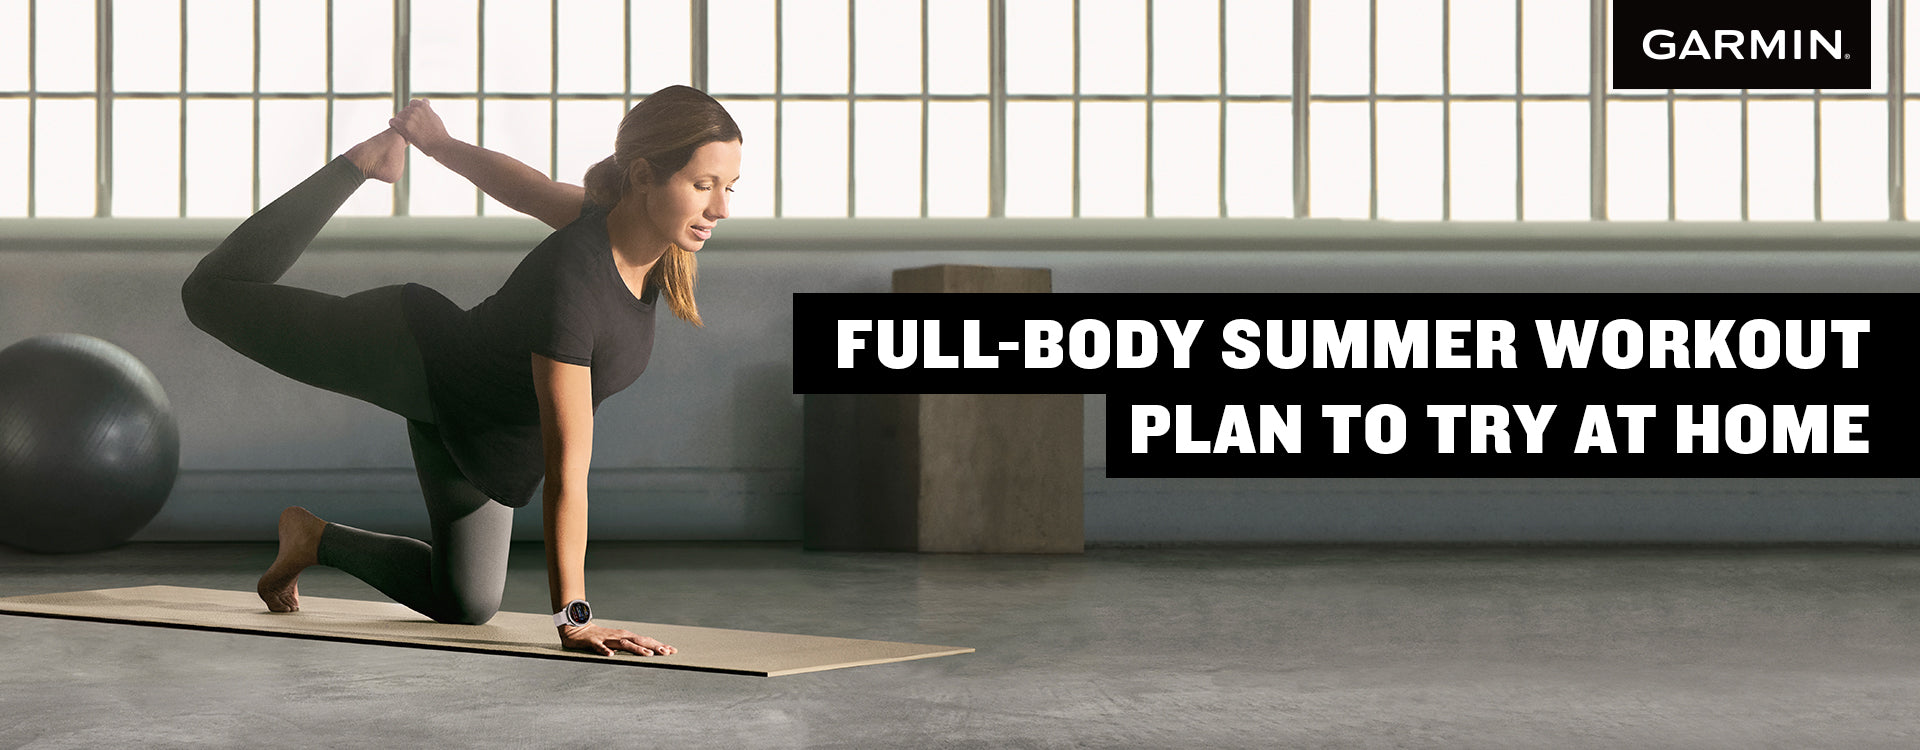 Full-Body Summer Workout Plan to Try at Home